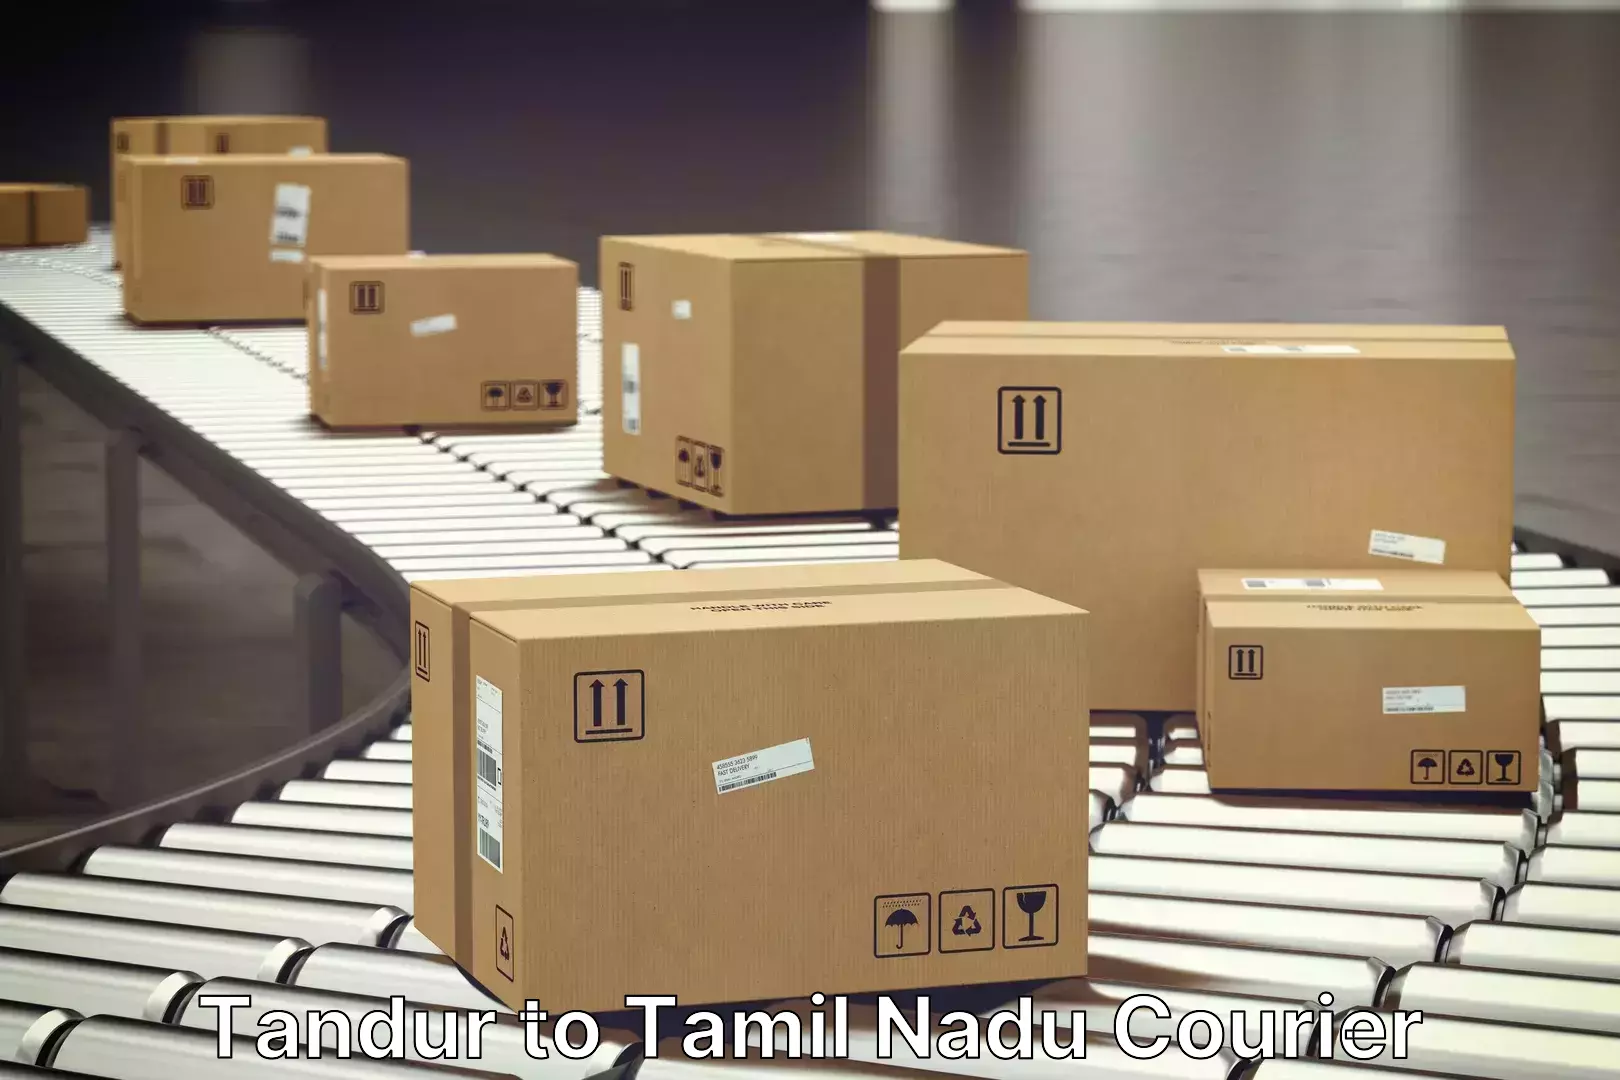 Moving and handling services Tandur to Tamil Nadu